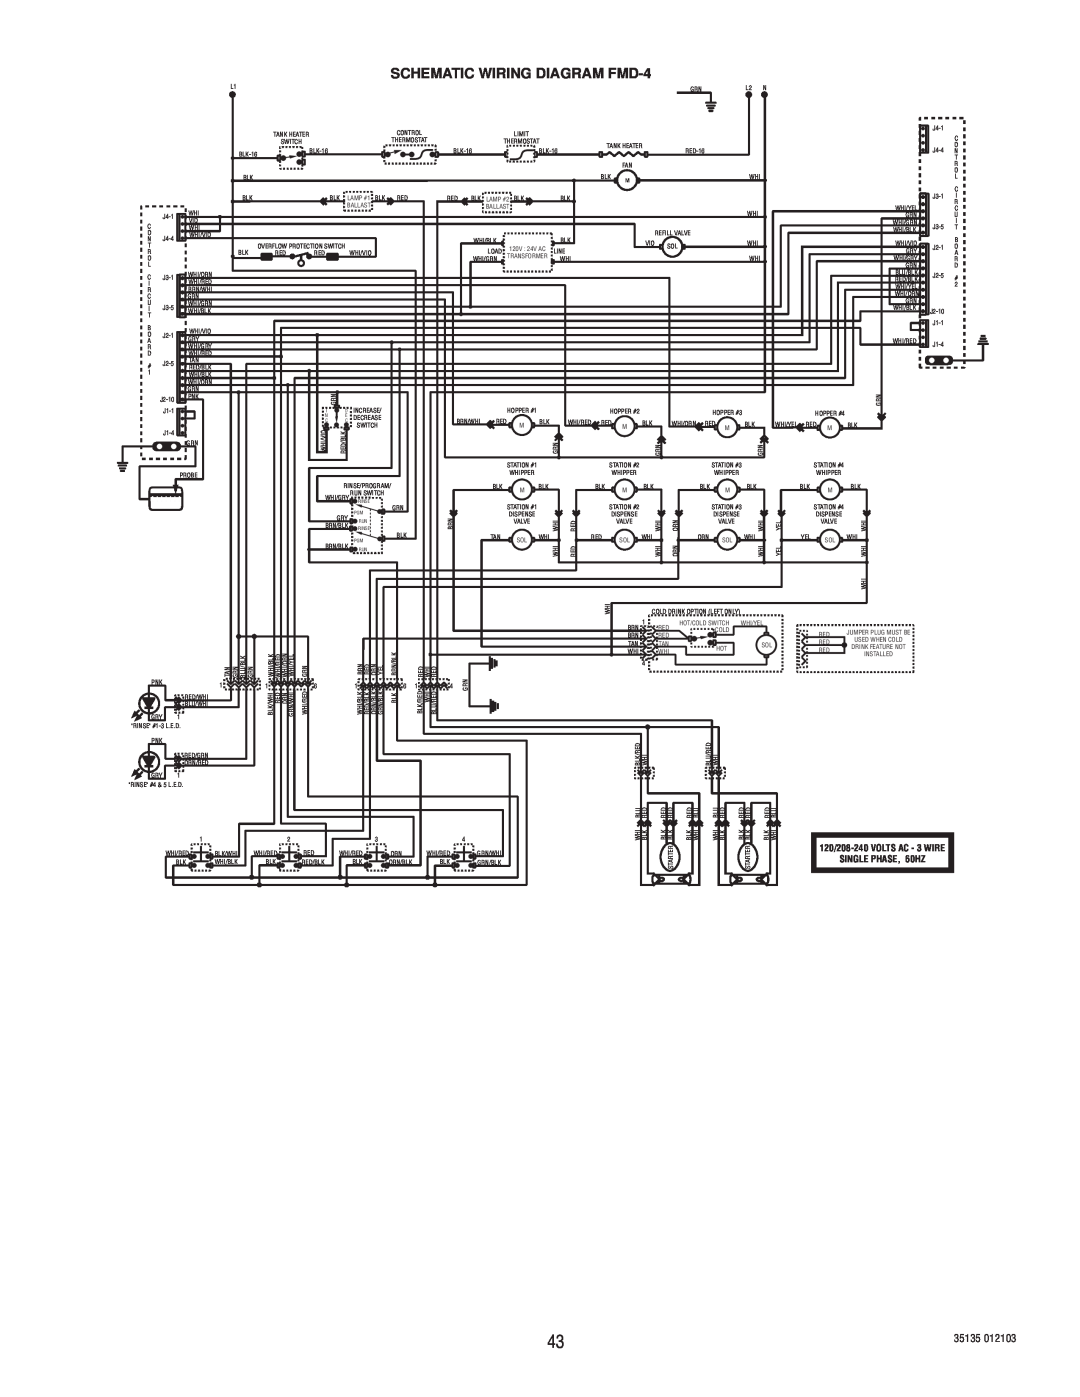 Bunn FMD-5 service manual SCHEMATIC WIRING DIAGRAM FMD-4, 120/208-240VOLTS AC - 3 WIRE SINGLE PHASE, 60HZ 